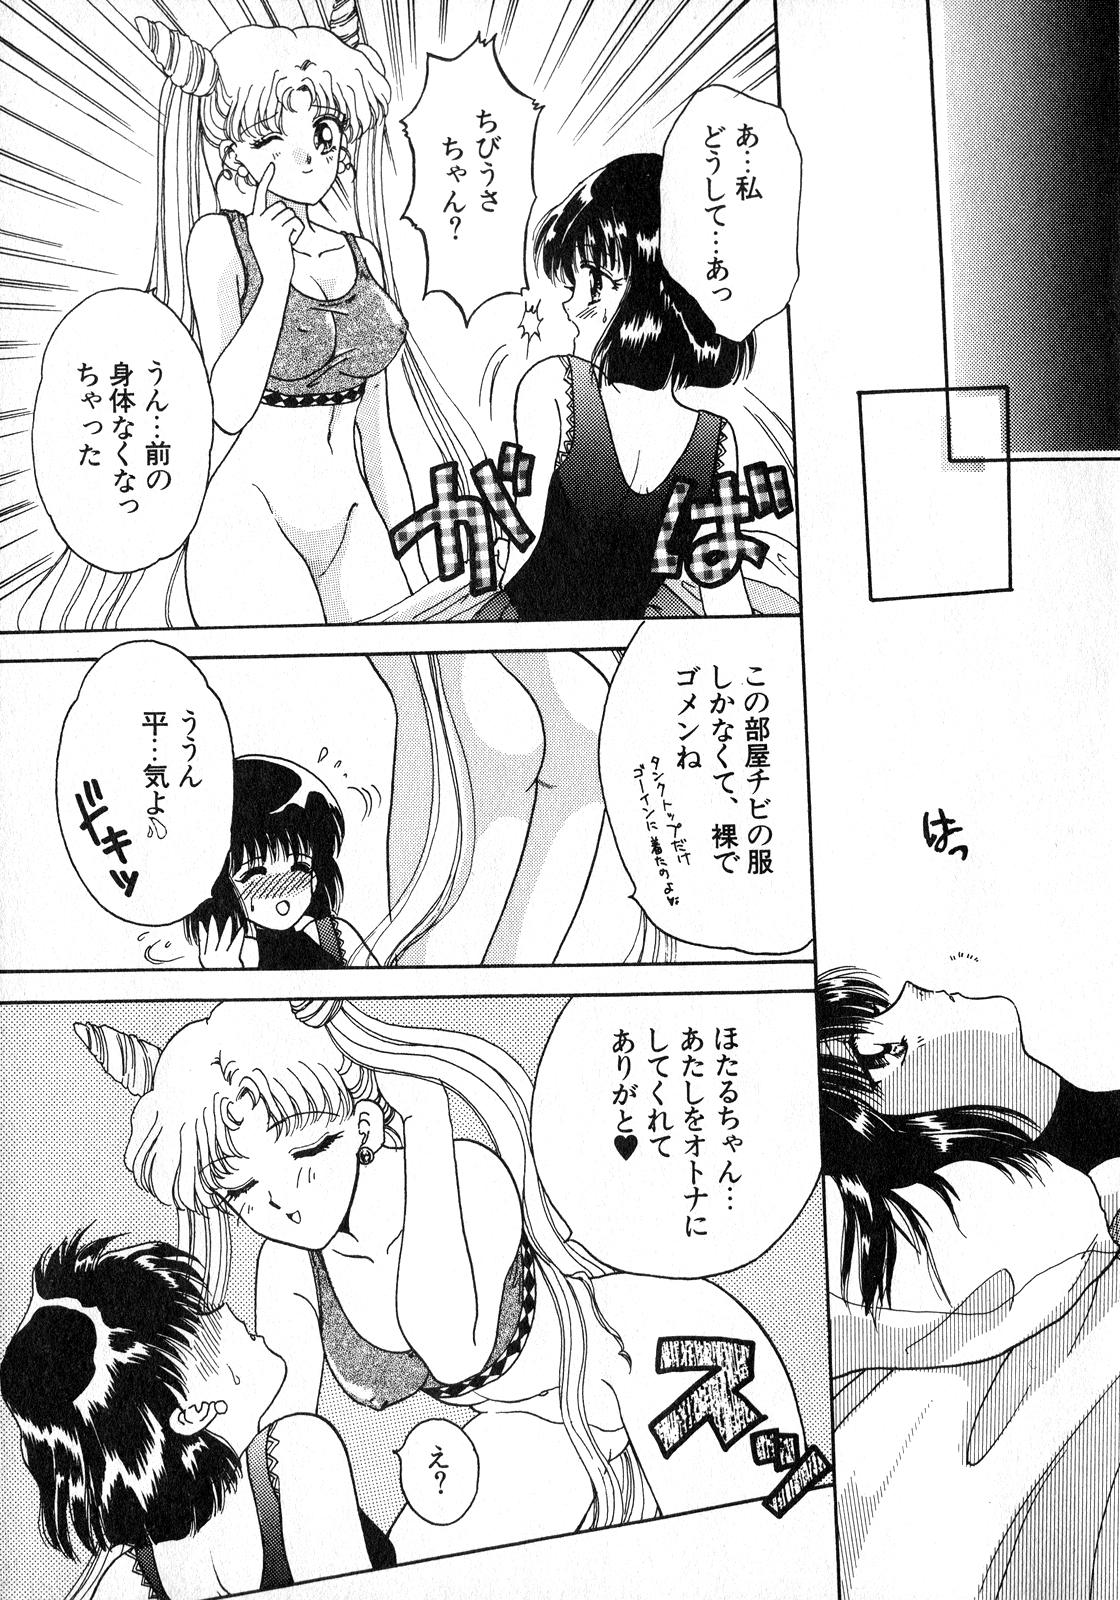 Uncensored Lunatic Party 8 - Sailor moon Girlfriends - Page 12